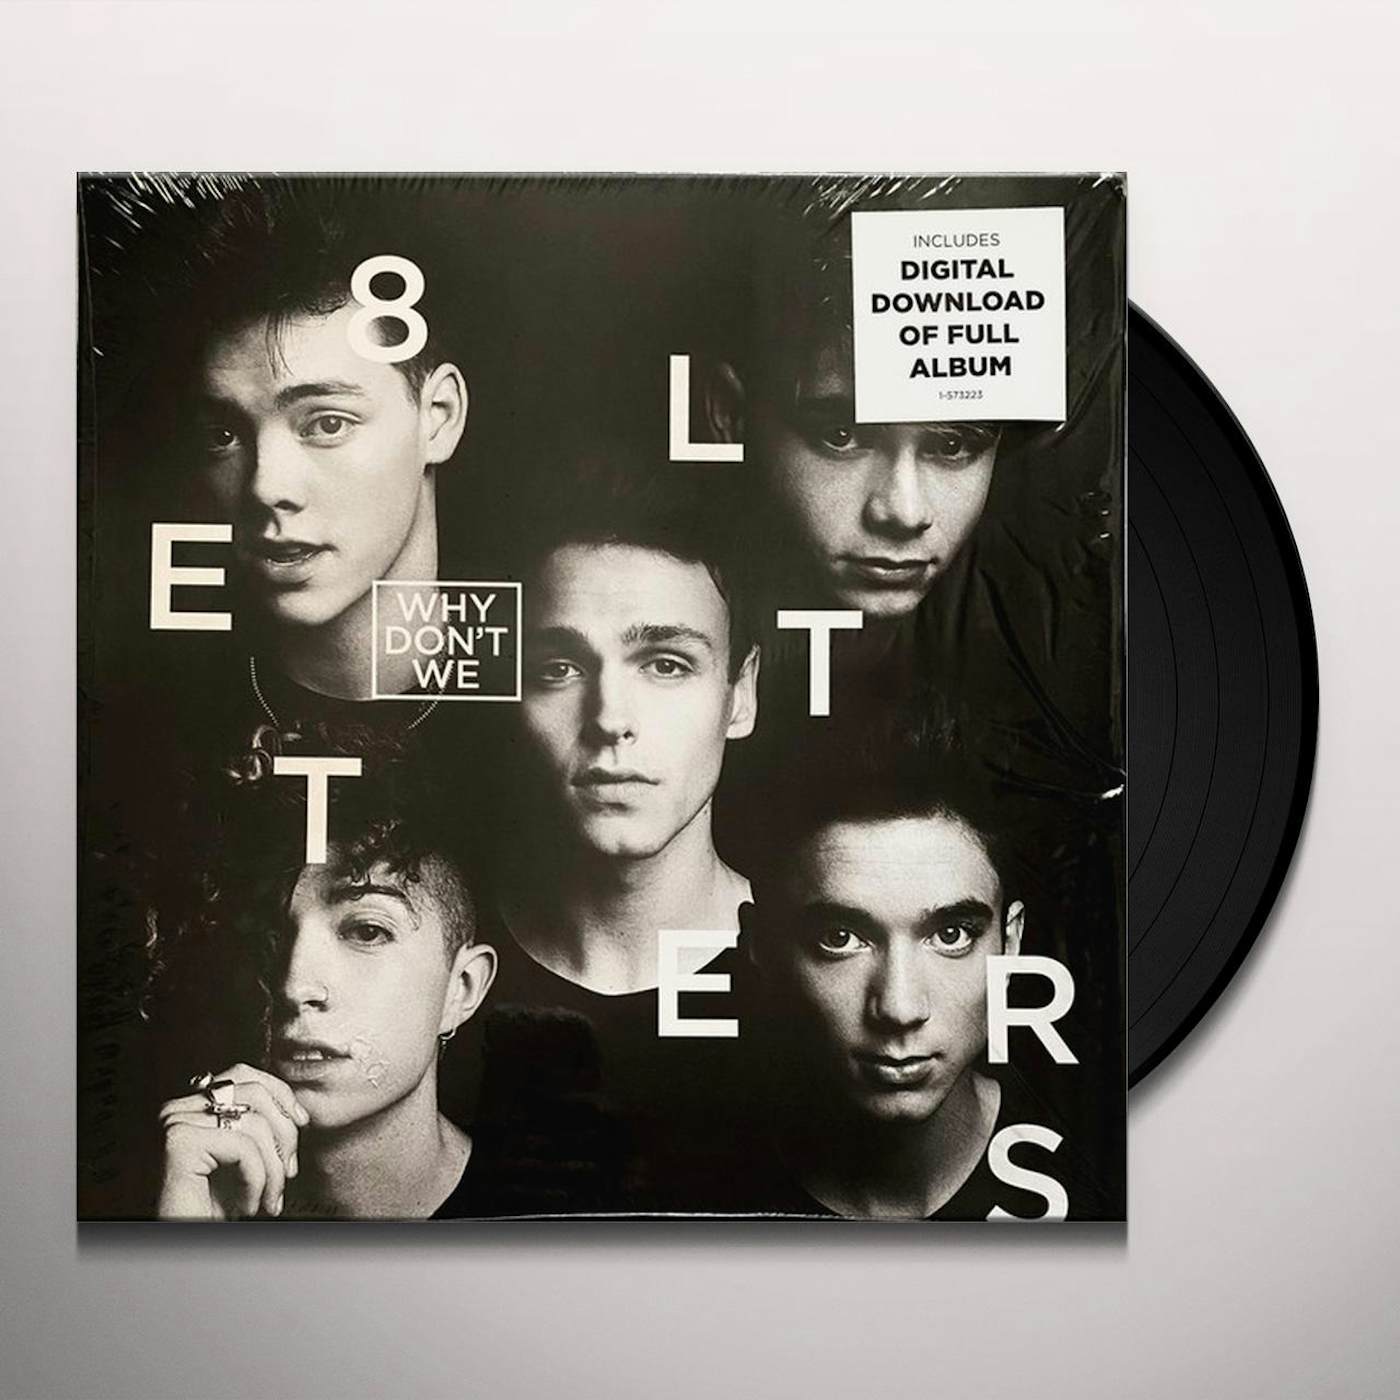 Why Don't We 8 Letters (DL) Vinyl Record